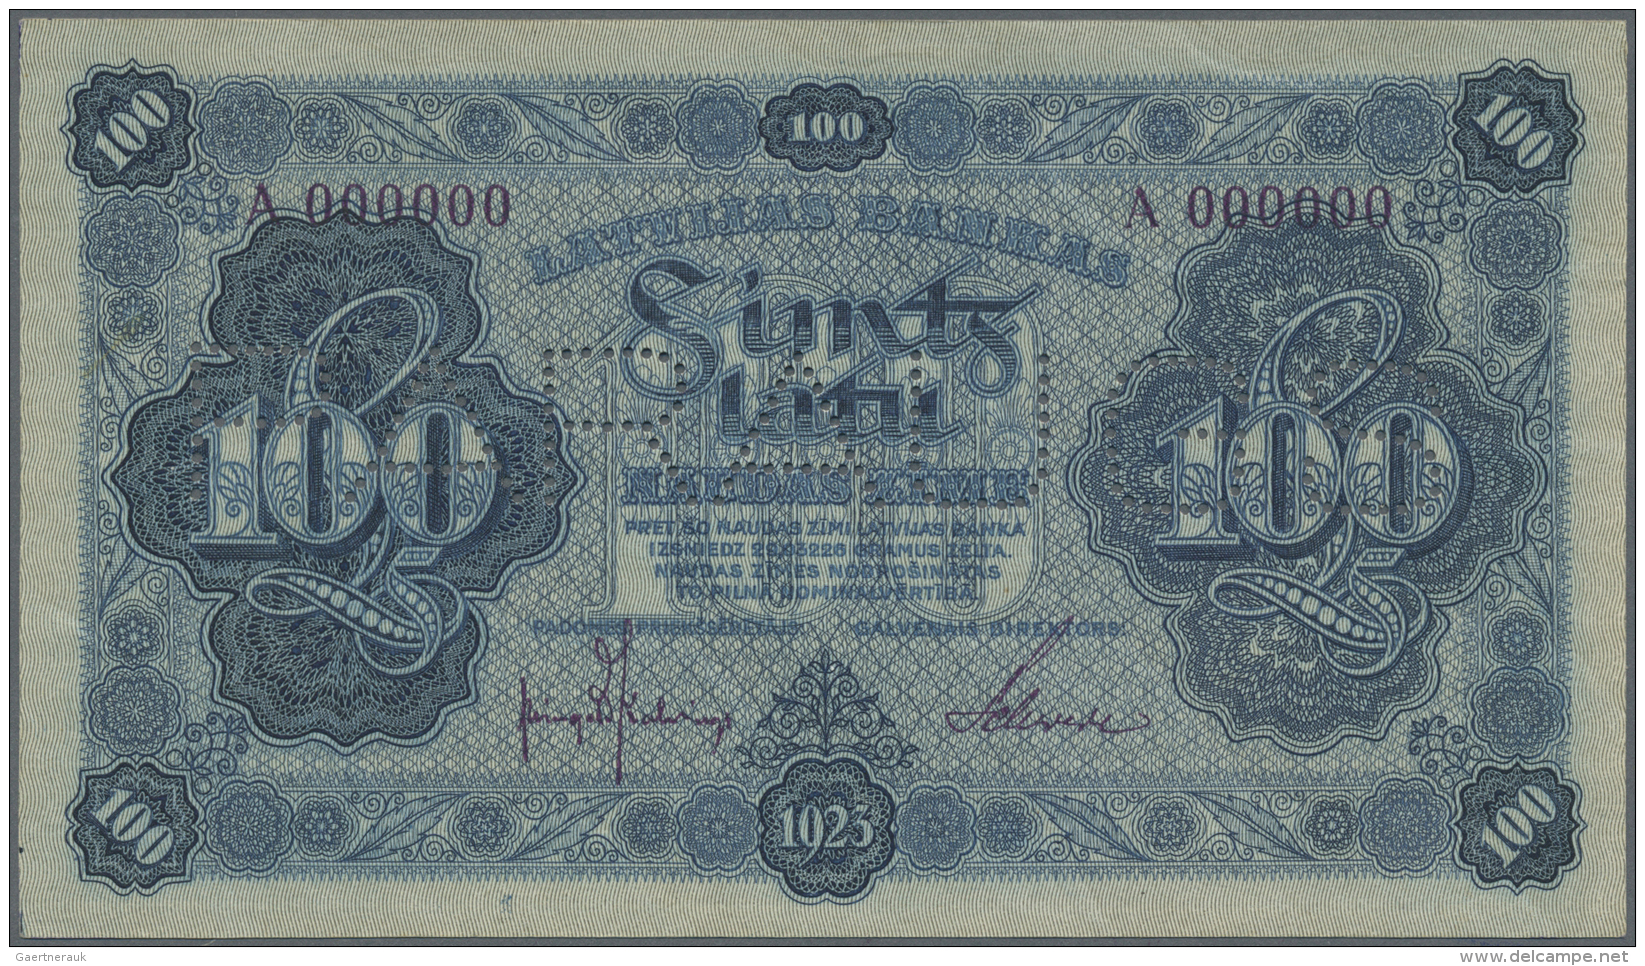 Latvia /Lettland: Rare 100 Latu 1923 FRONT SPECIMEN P. 14as, Uniface Printed On Watermarked Paper, Series A000000, Sign. - Lettonie